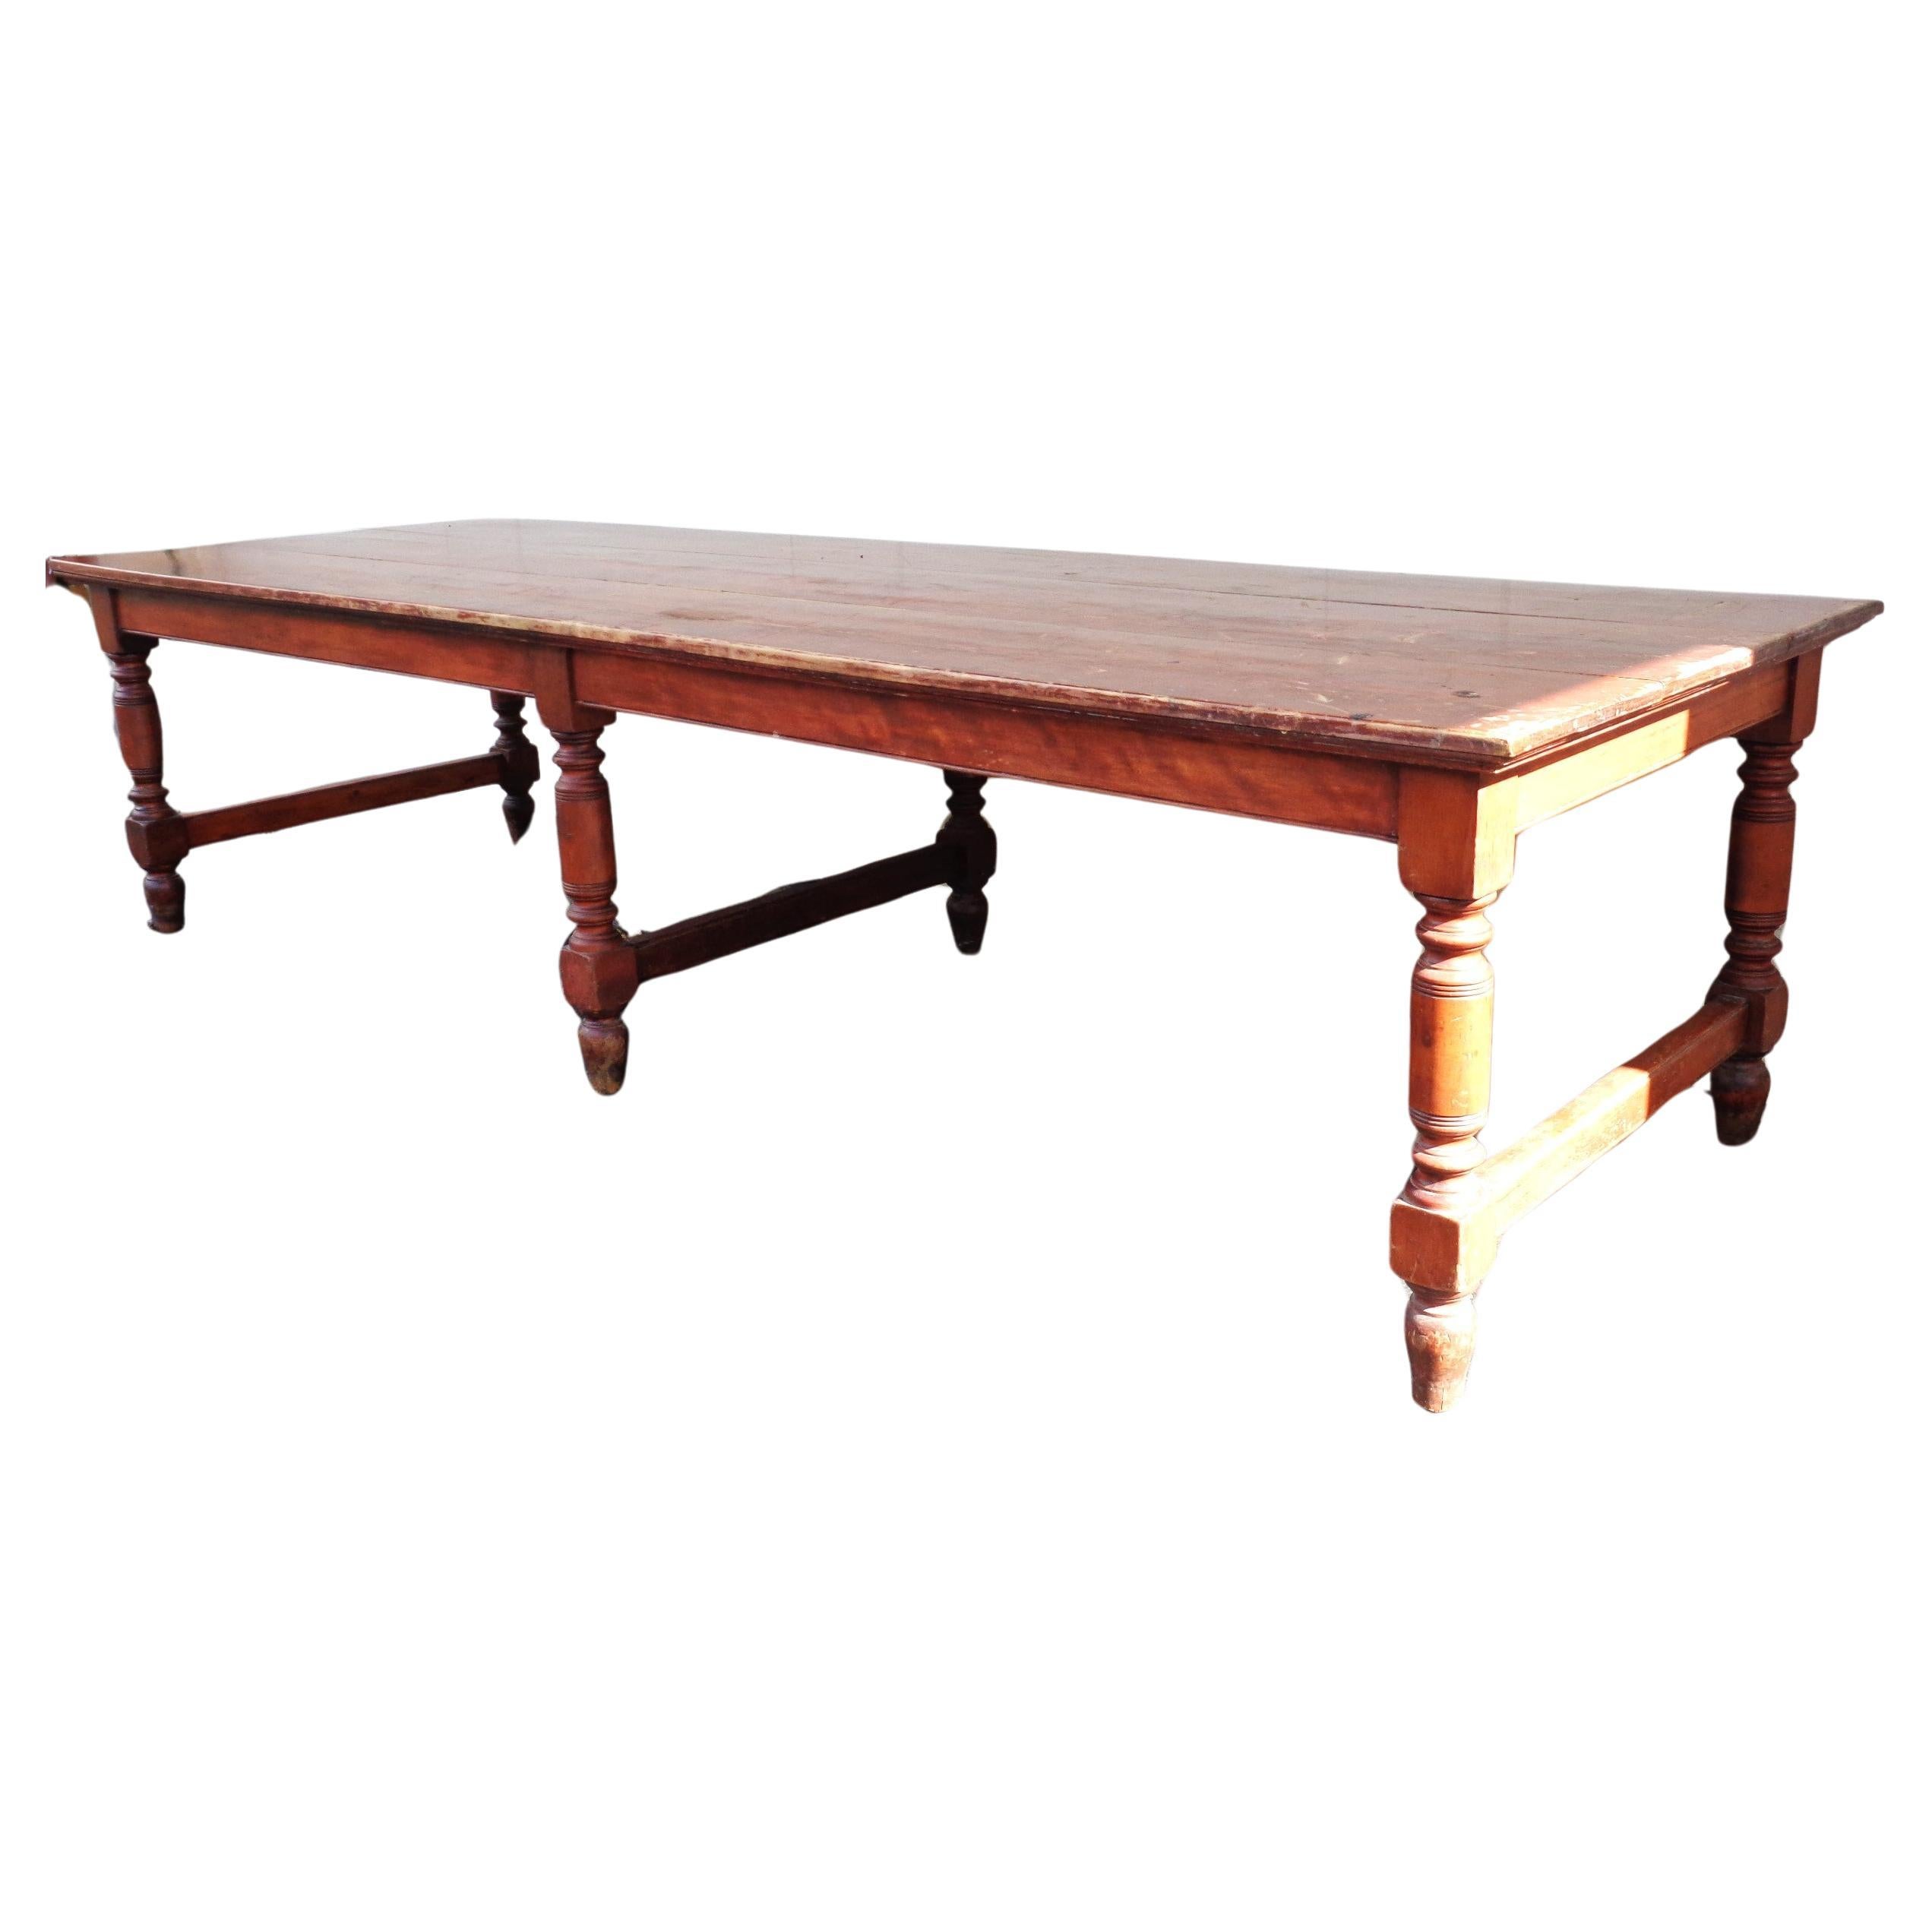 Turned Antique American Banquet Dining Table, 1870-1880 For Sale